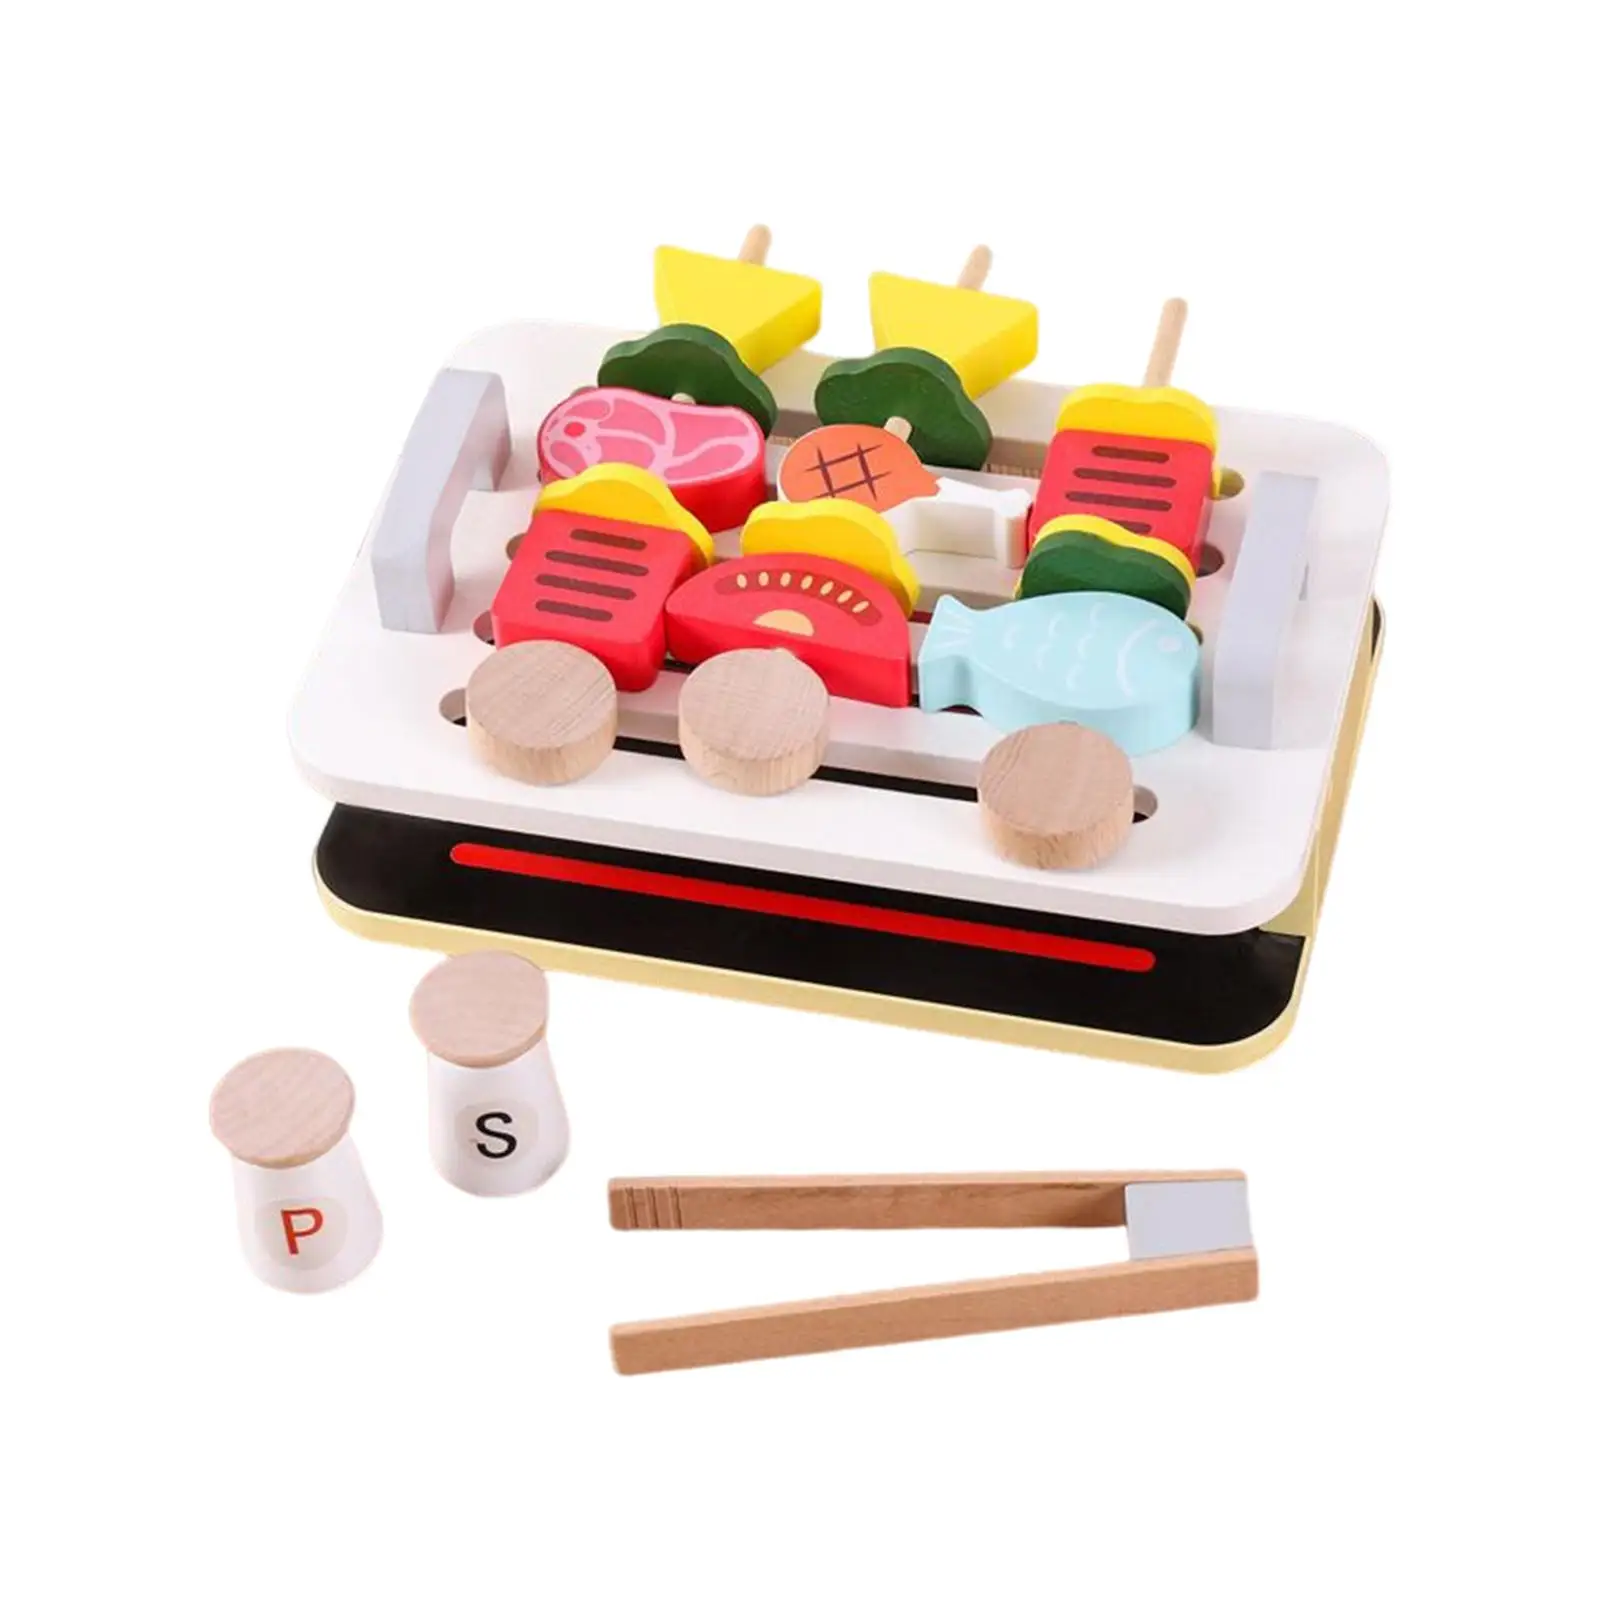 Montessori Grill Wood Toy BBQ Set Indoor Activity Set Kitchen Toys Food Kitchen Toys for Kids Toddlers Girls Boys Holiday Gifts